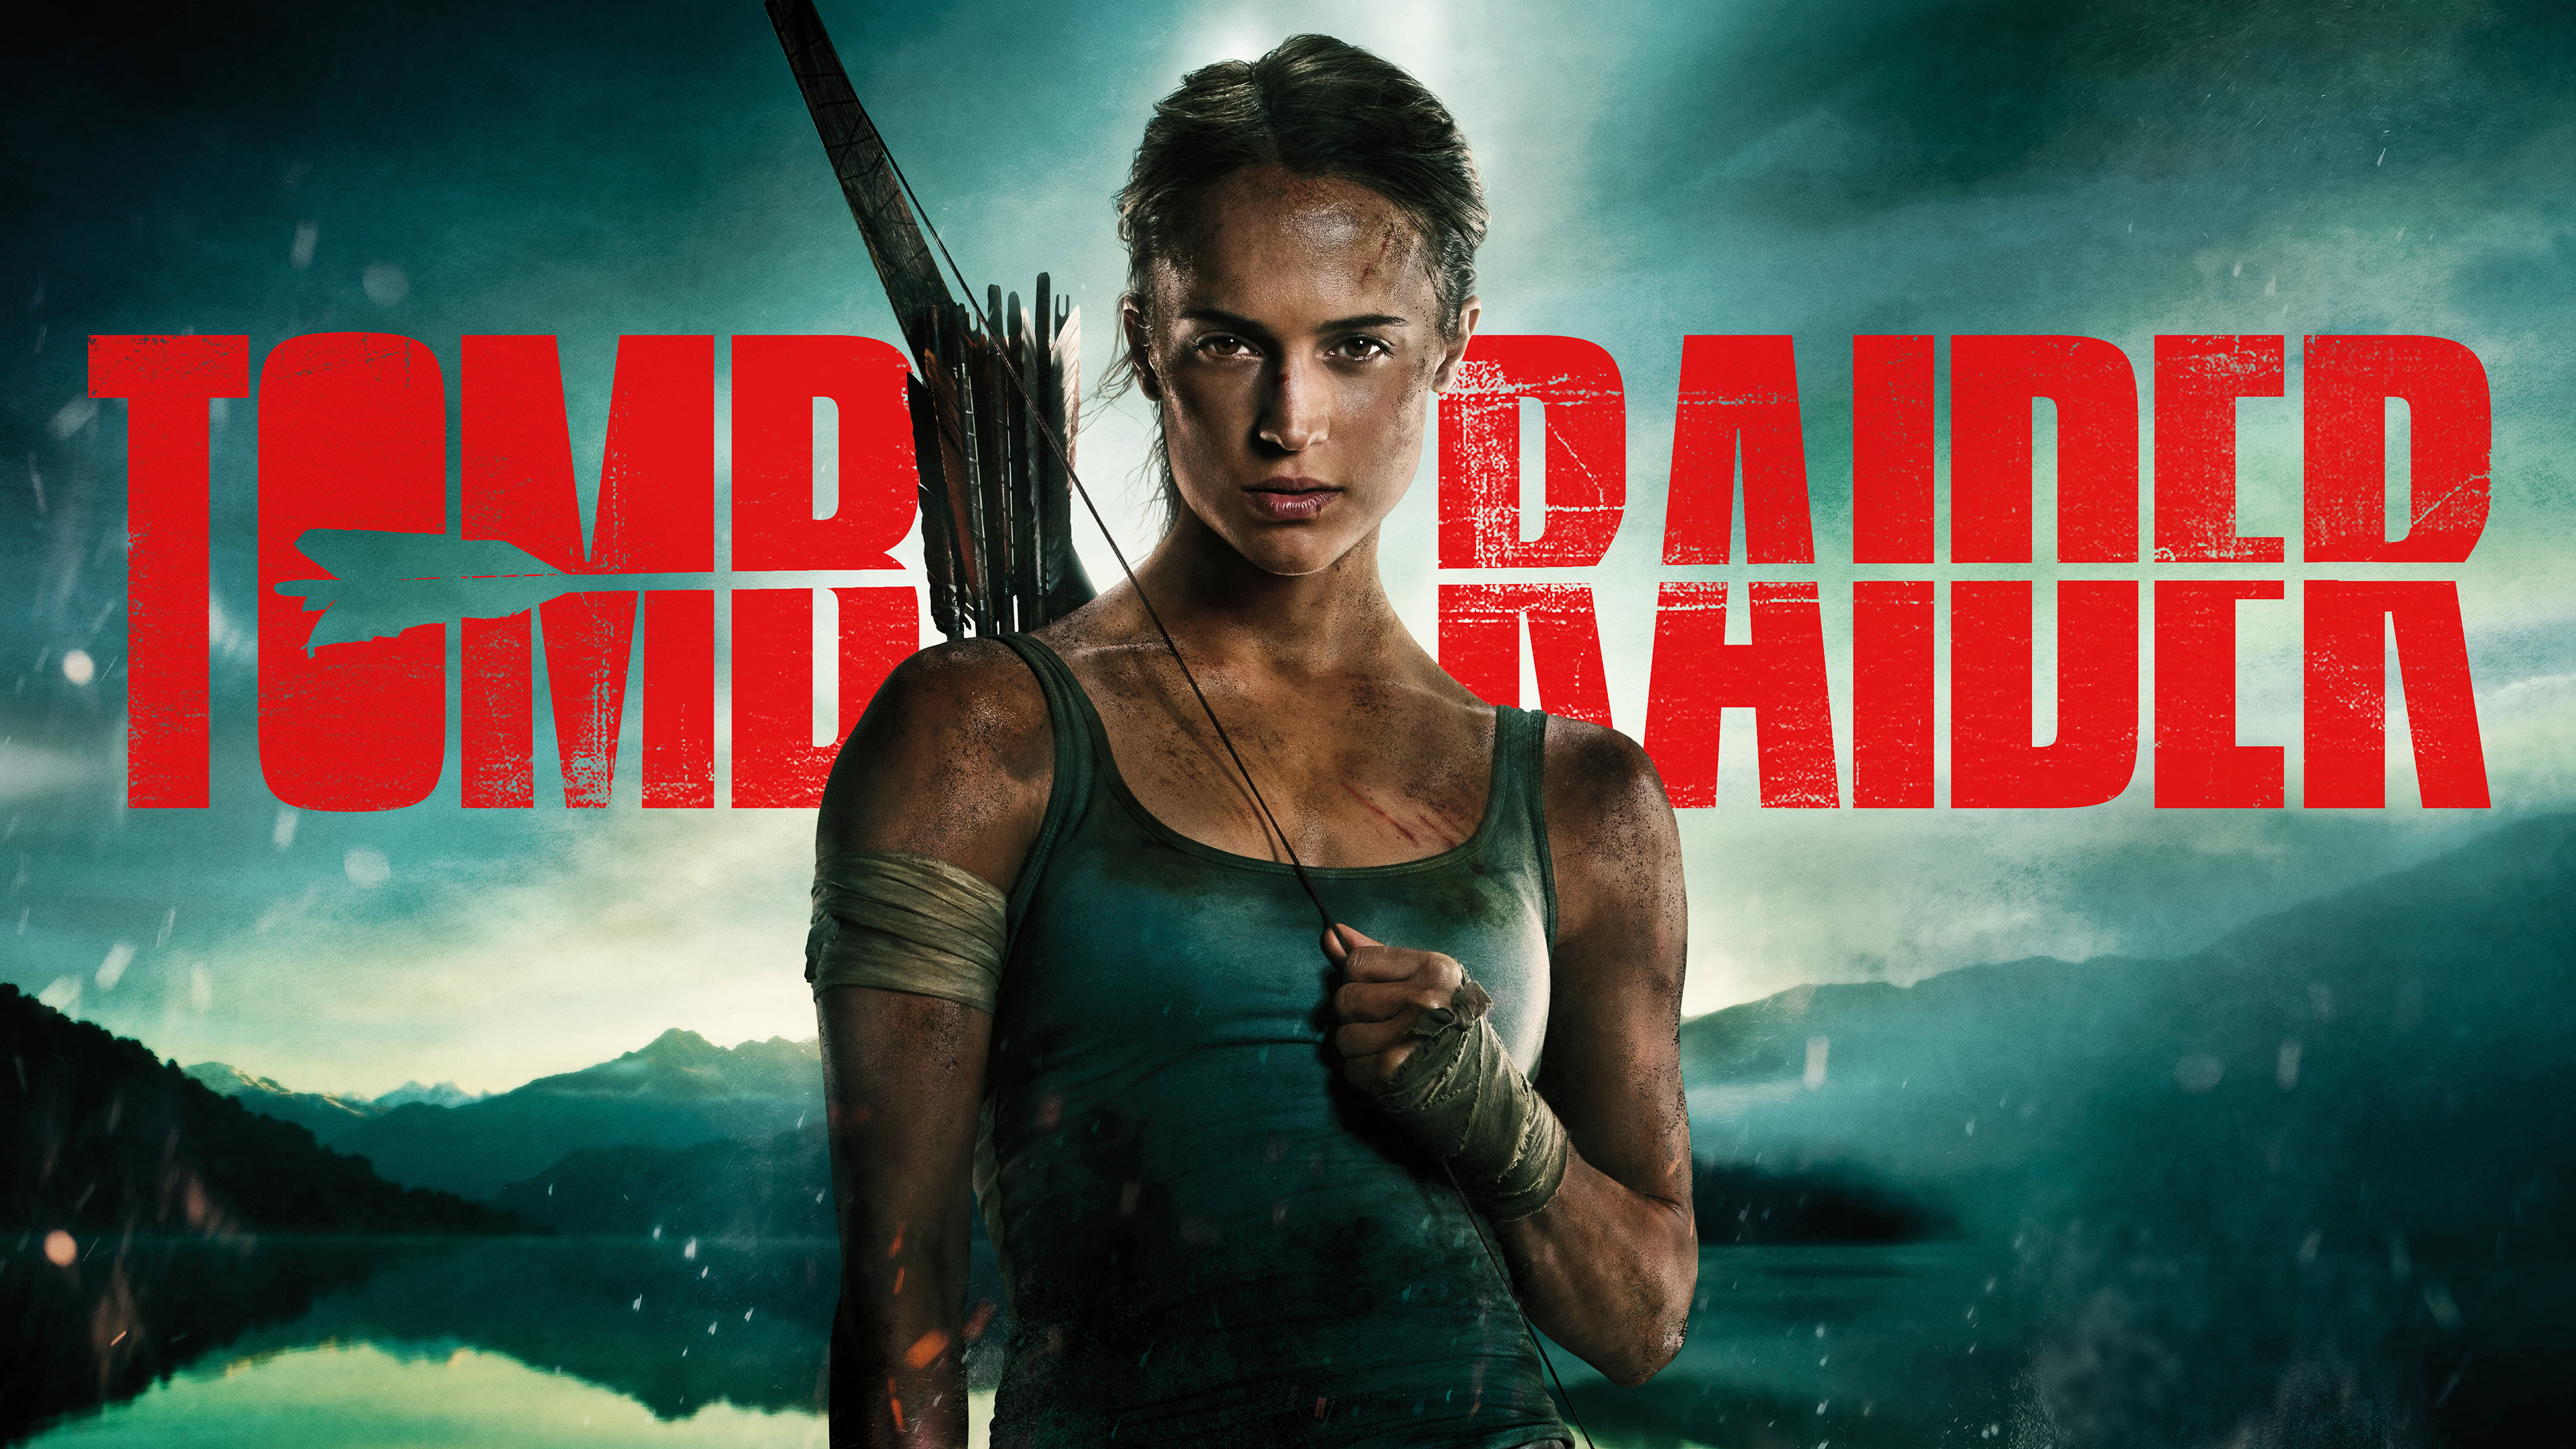 Tomb Raider: An American and British co-production, Poster. 3840x2160 4K Wallpaper.